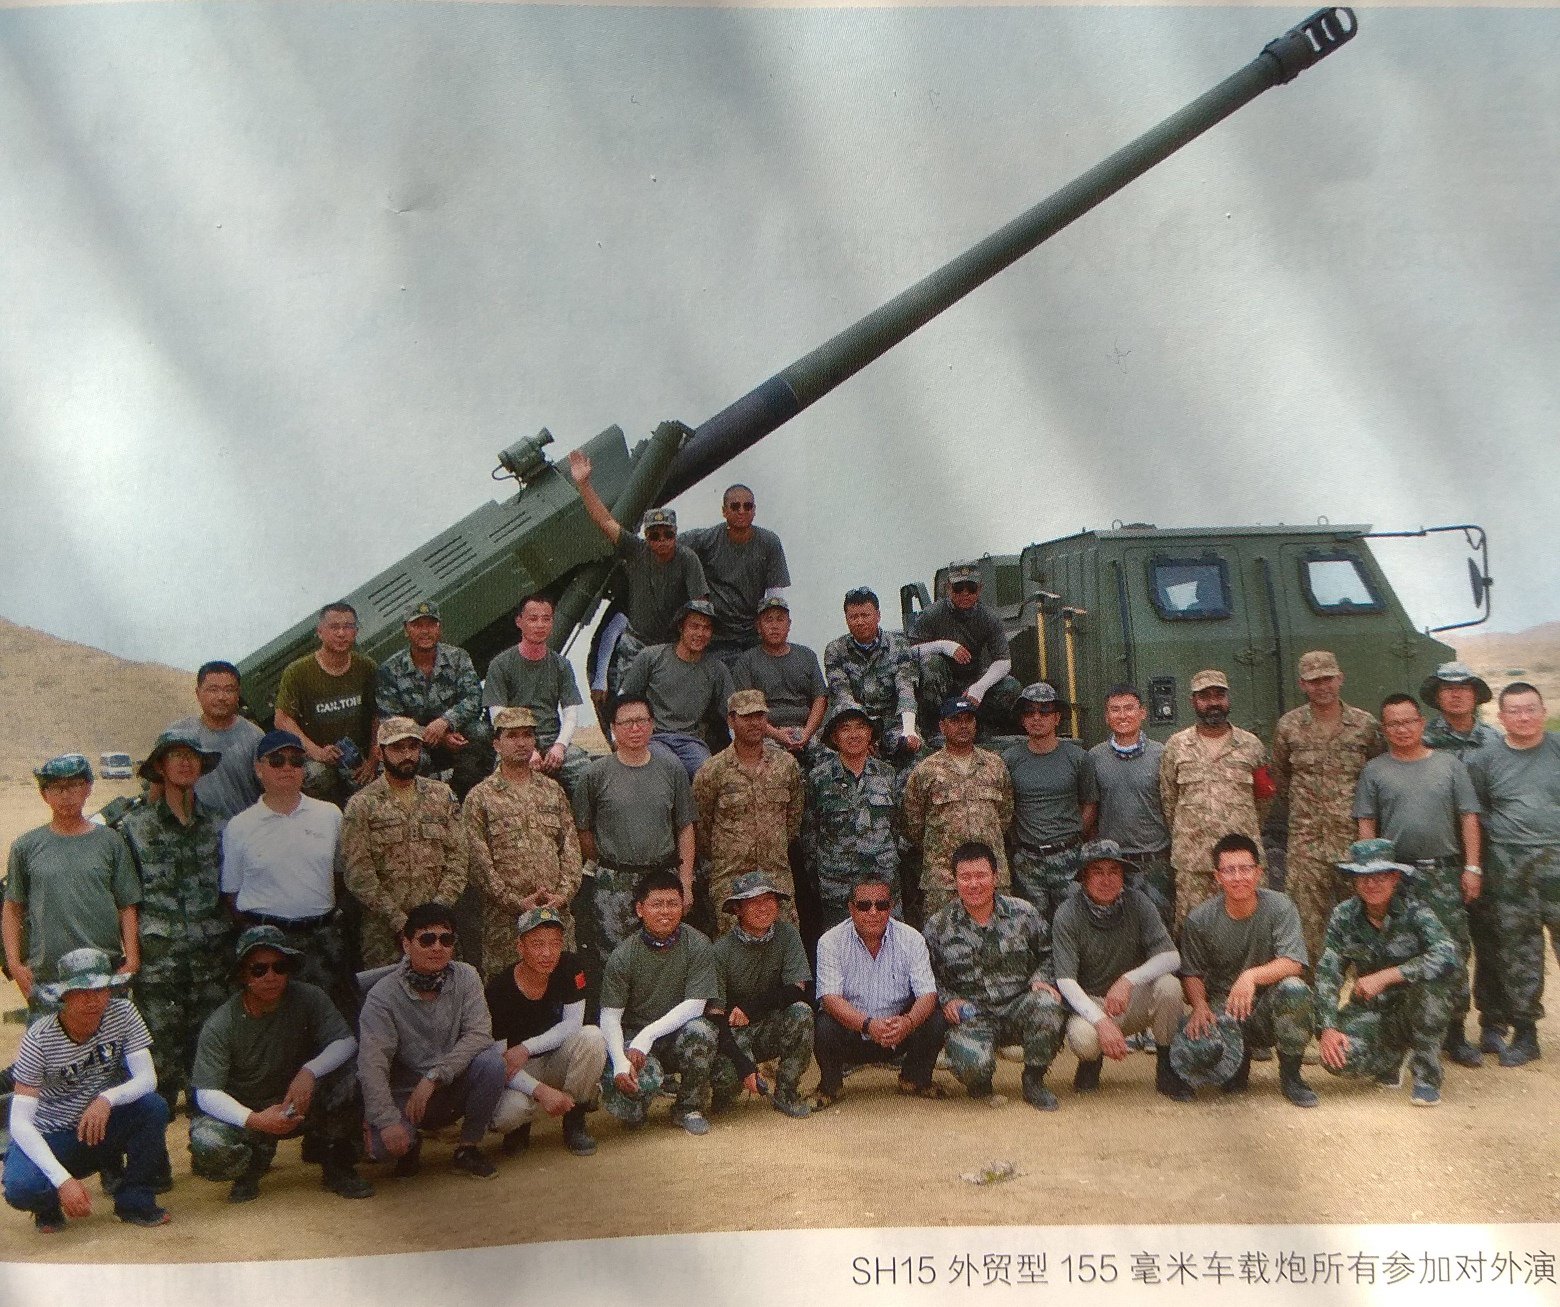 Pakistan Acquires Sh-15 &quot;Nuclear-Capable&quot; Howitzer Artillery Guns From China